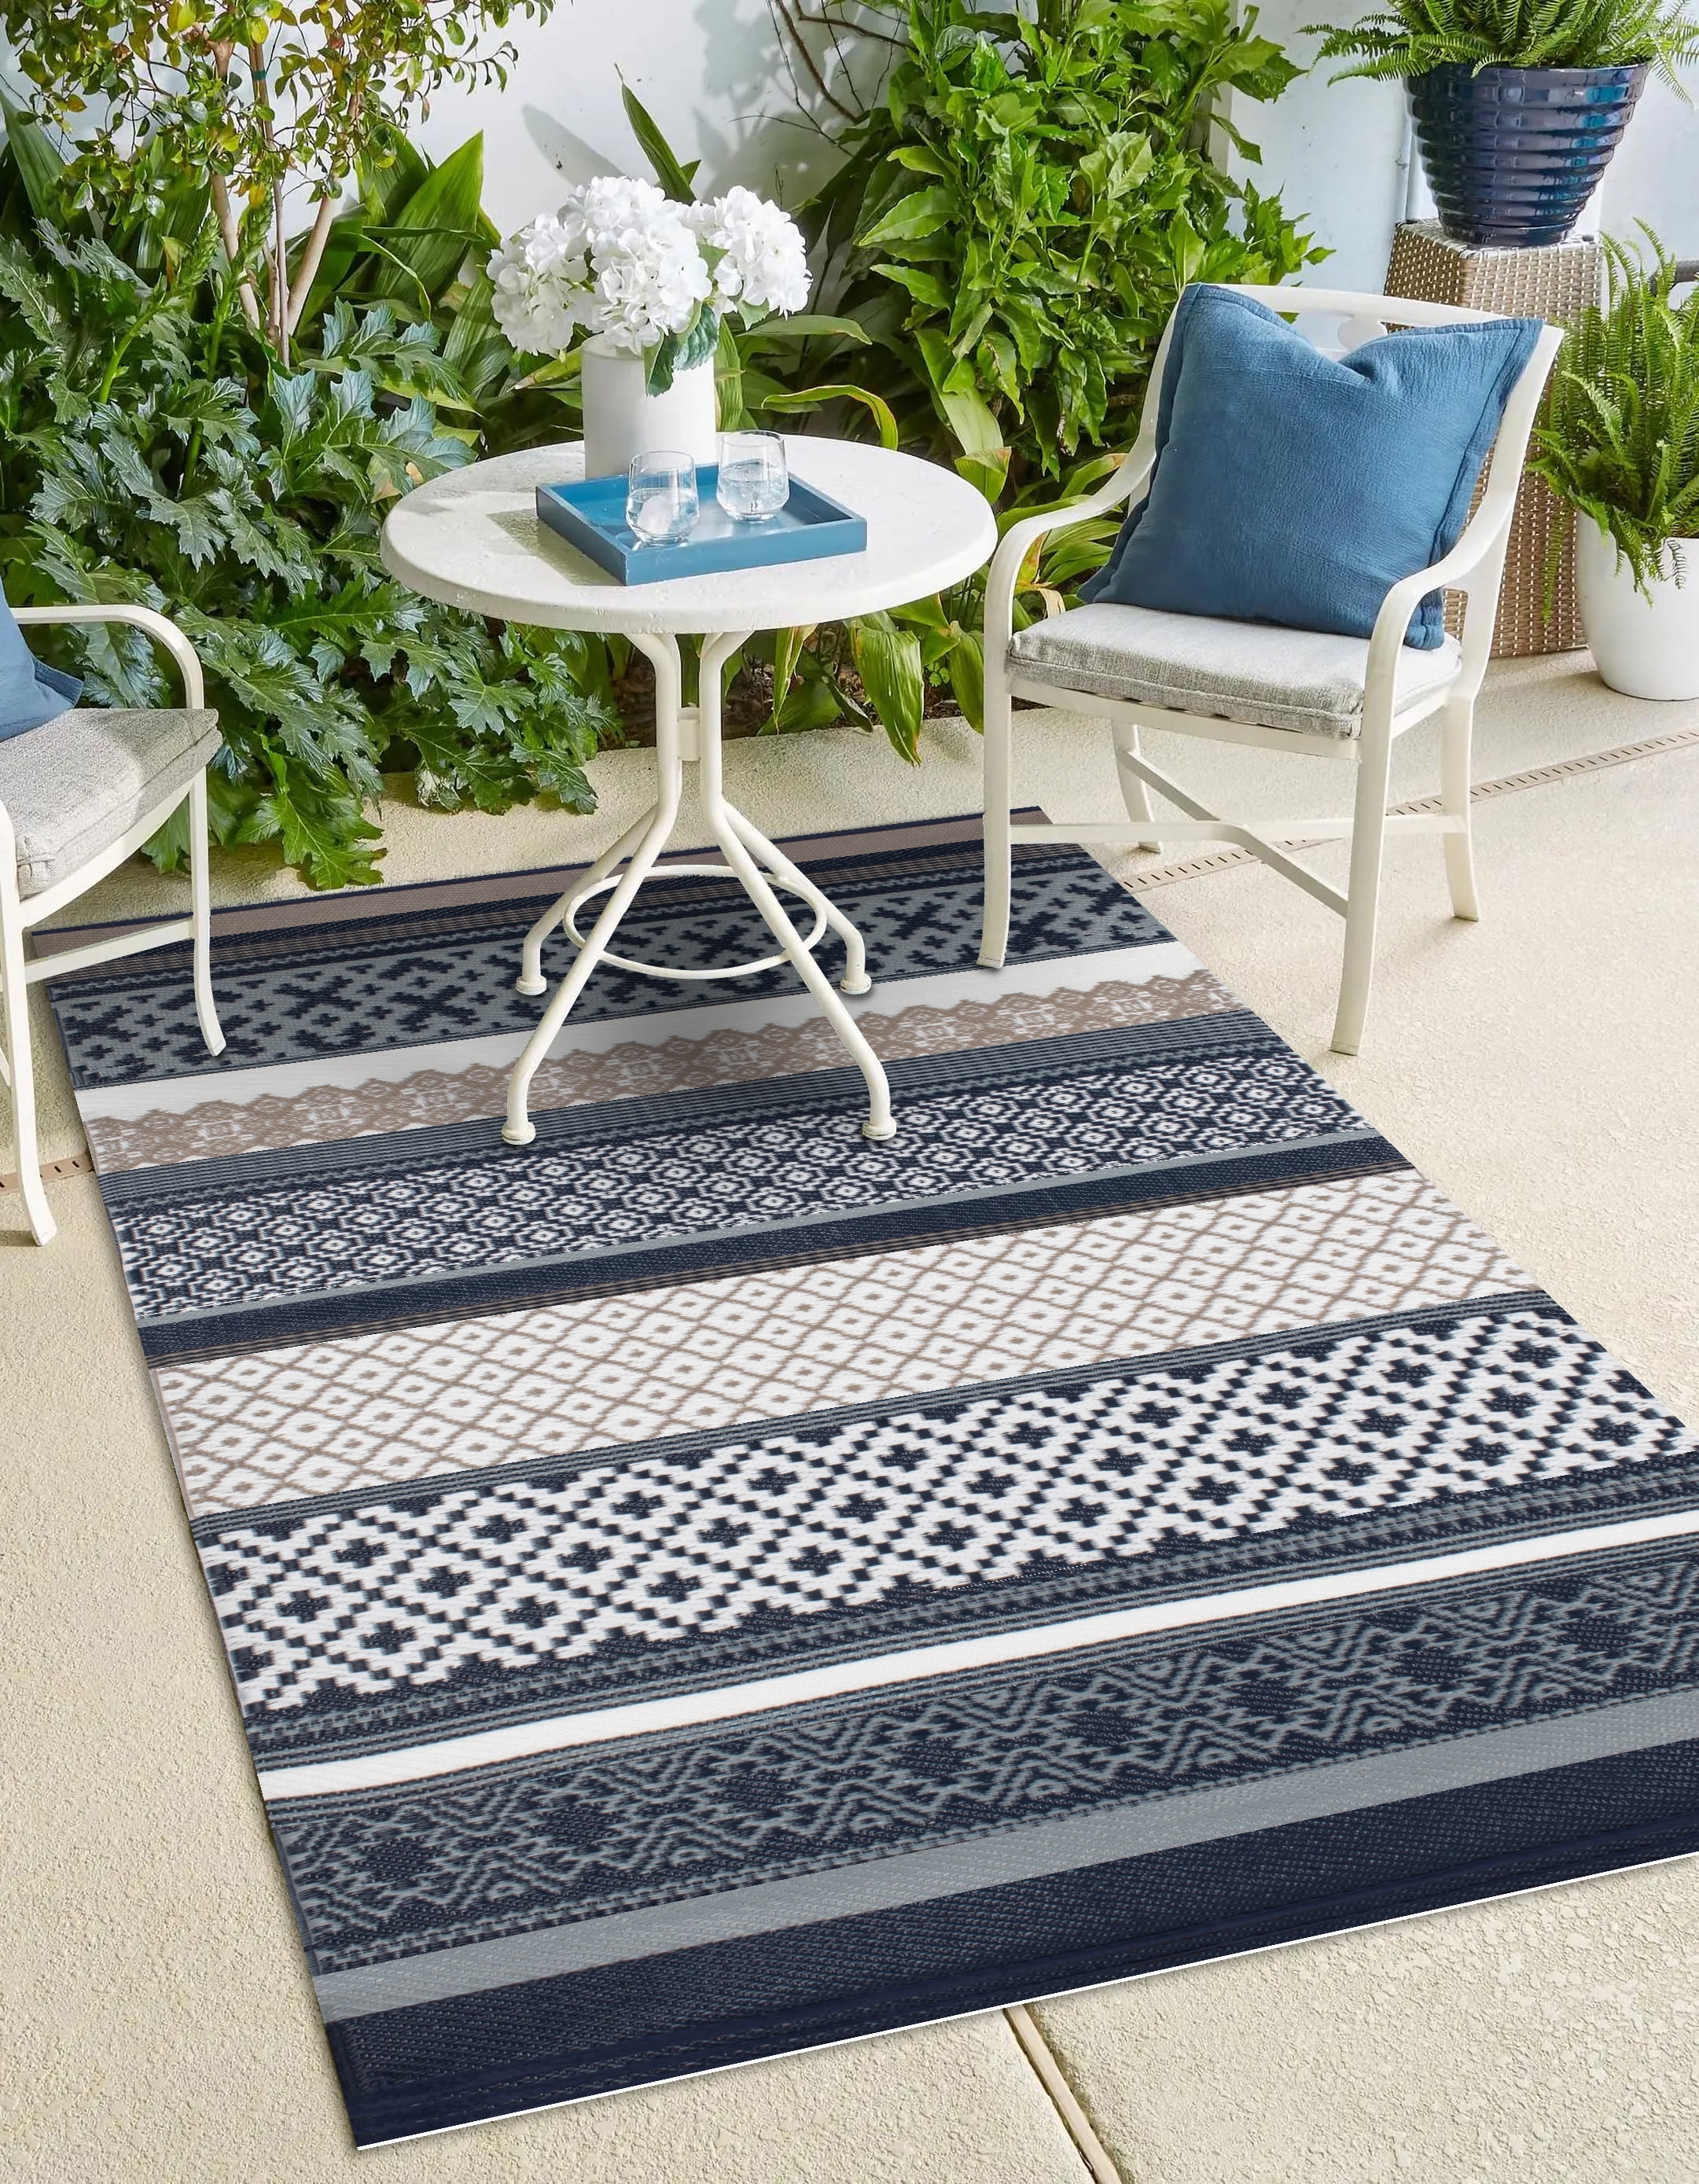 Charcoal Grey Runner Rug Outdoor Summer Patio Picnic Rug Washable Budget Rugs UK 